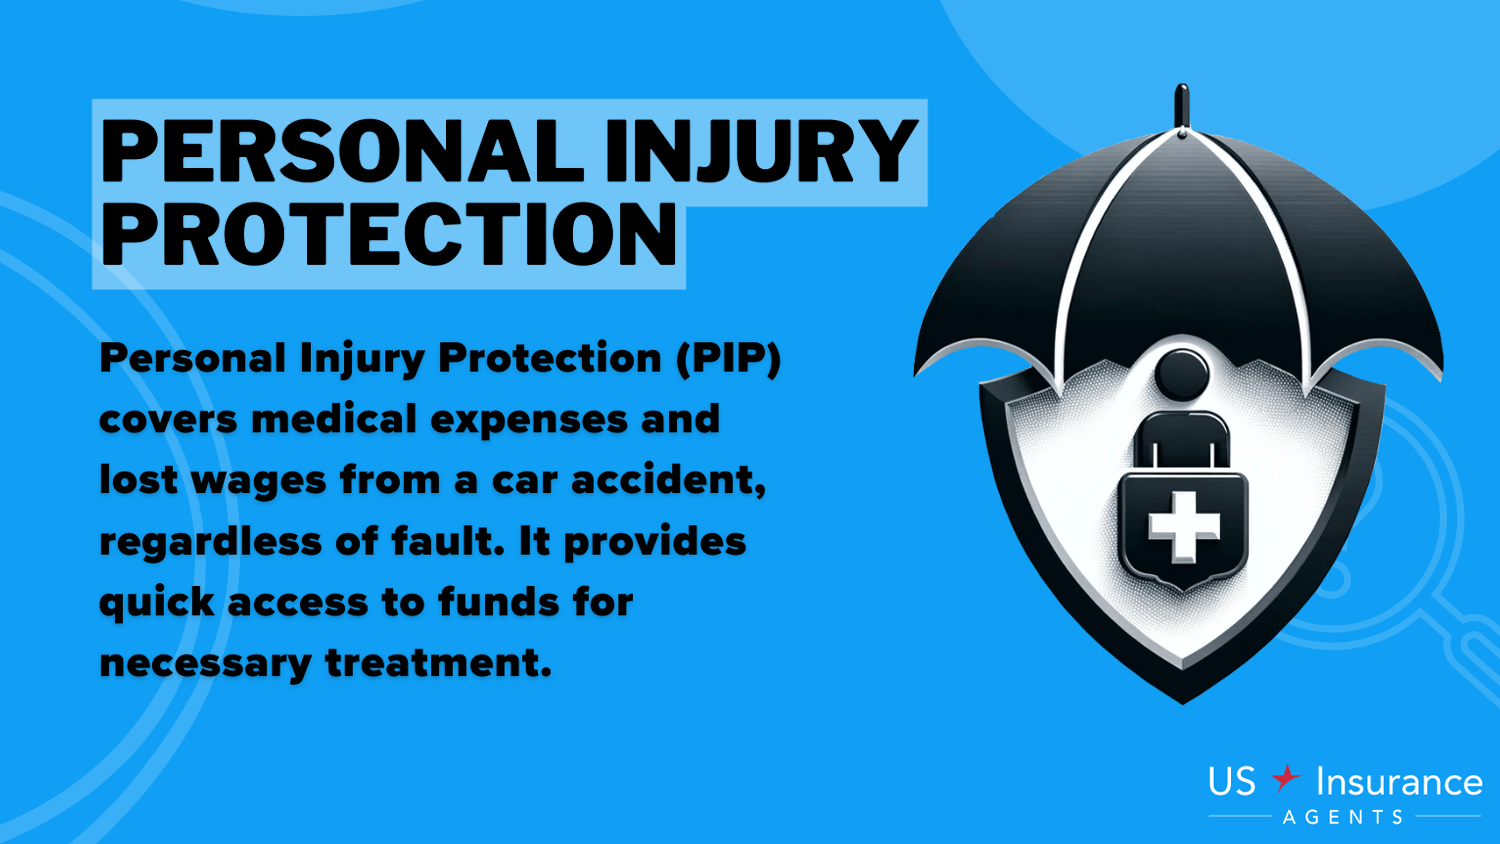 Cheap Volkswagen e-Golf Car Insurance: Personal Injury Protection Definition Card